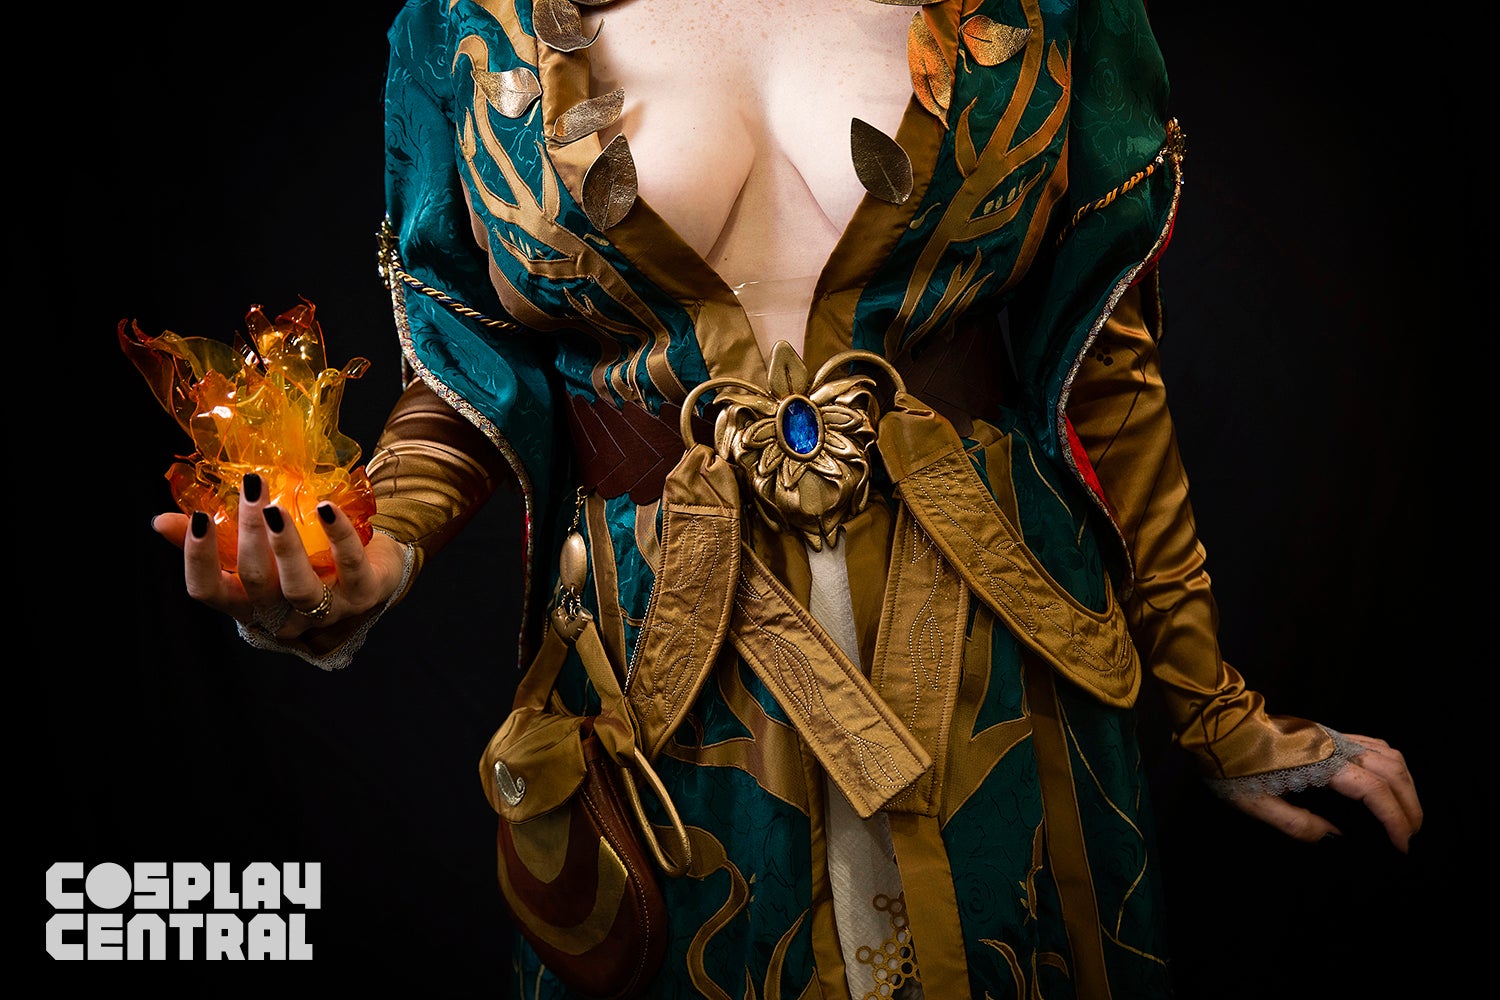 Cornetto Cosplay as Triss Merigold from The Witcher 3: Wild Hunt video game.